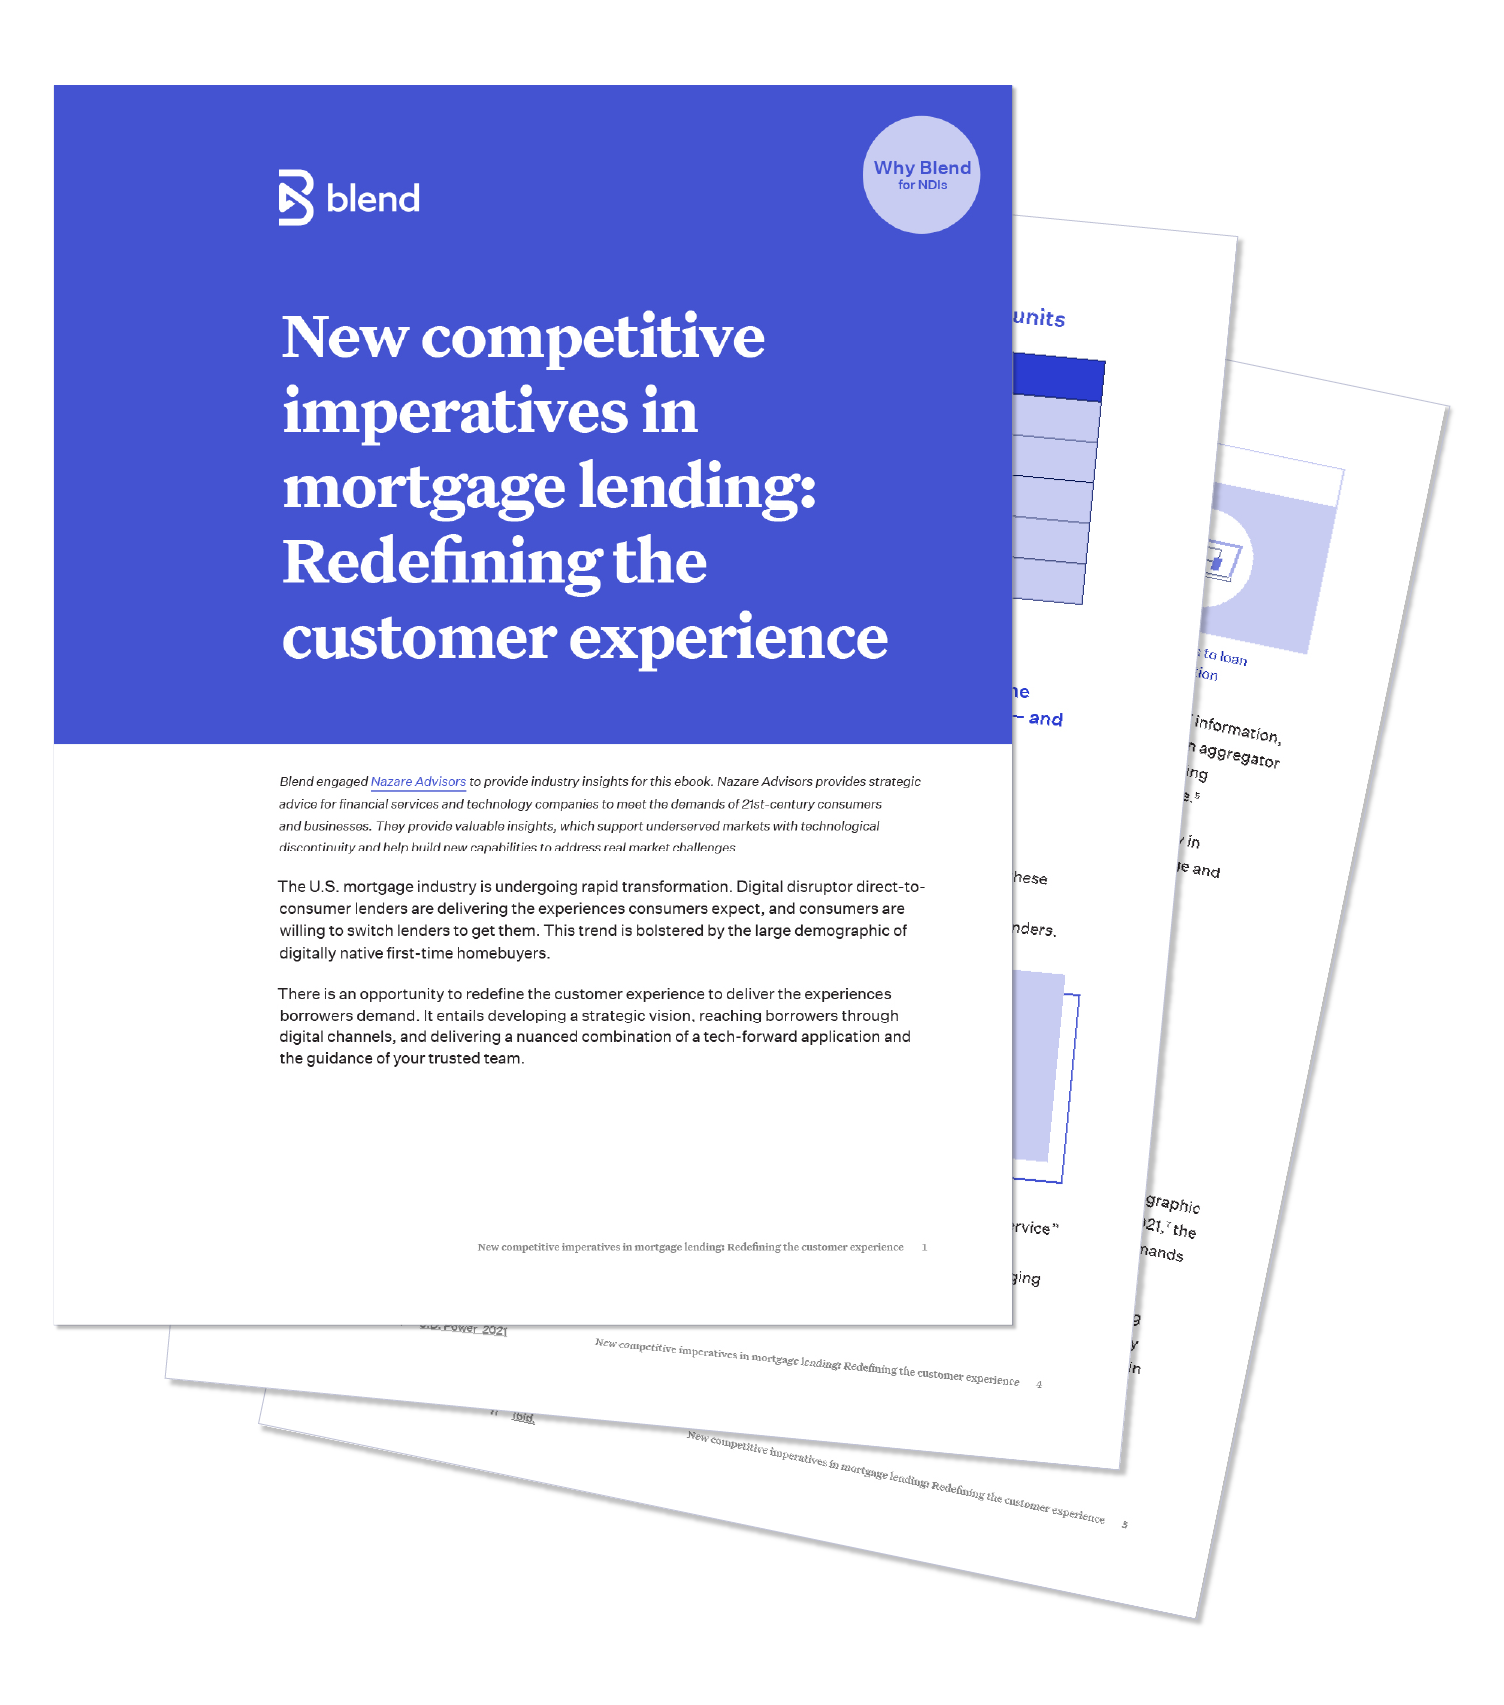 A Blend ebook titled New competitive imperatives in mortgage lending: Redefining the customer experience.